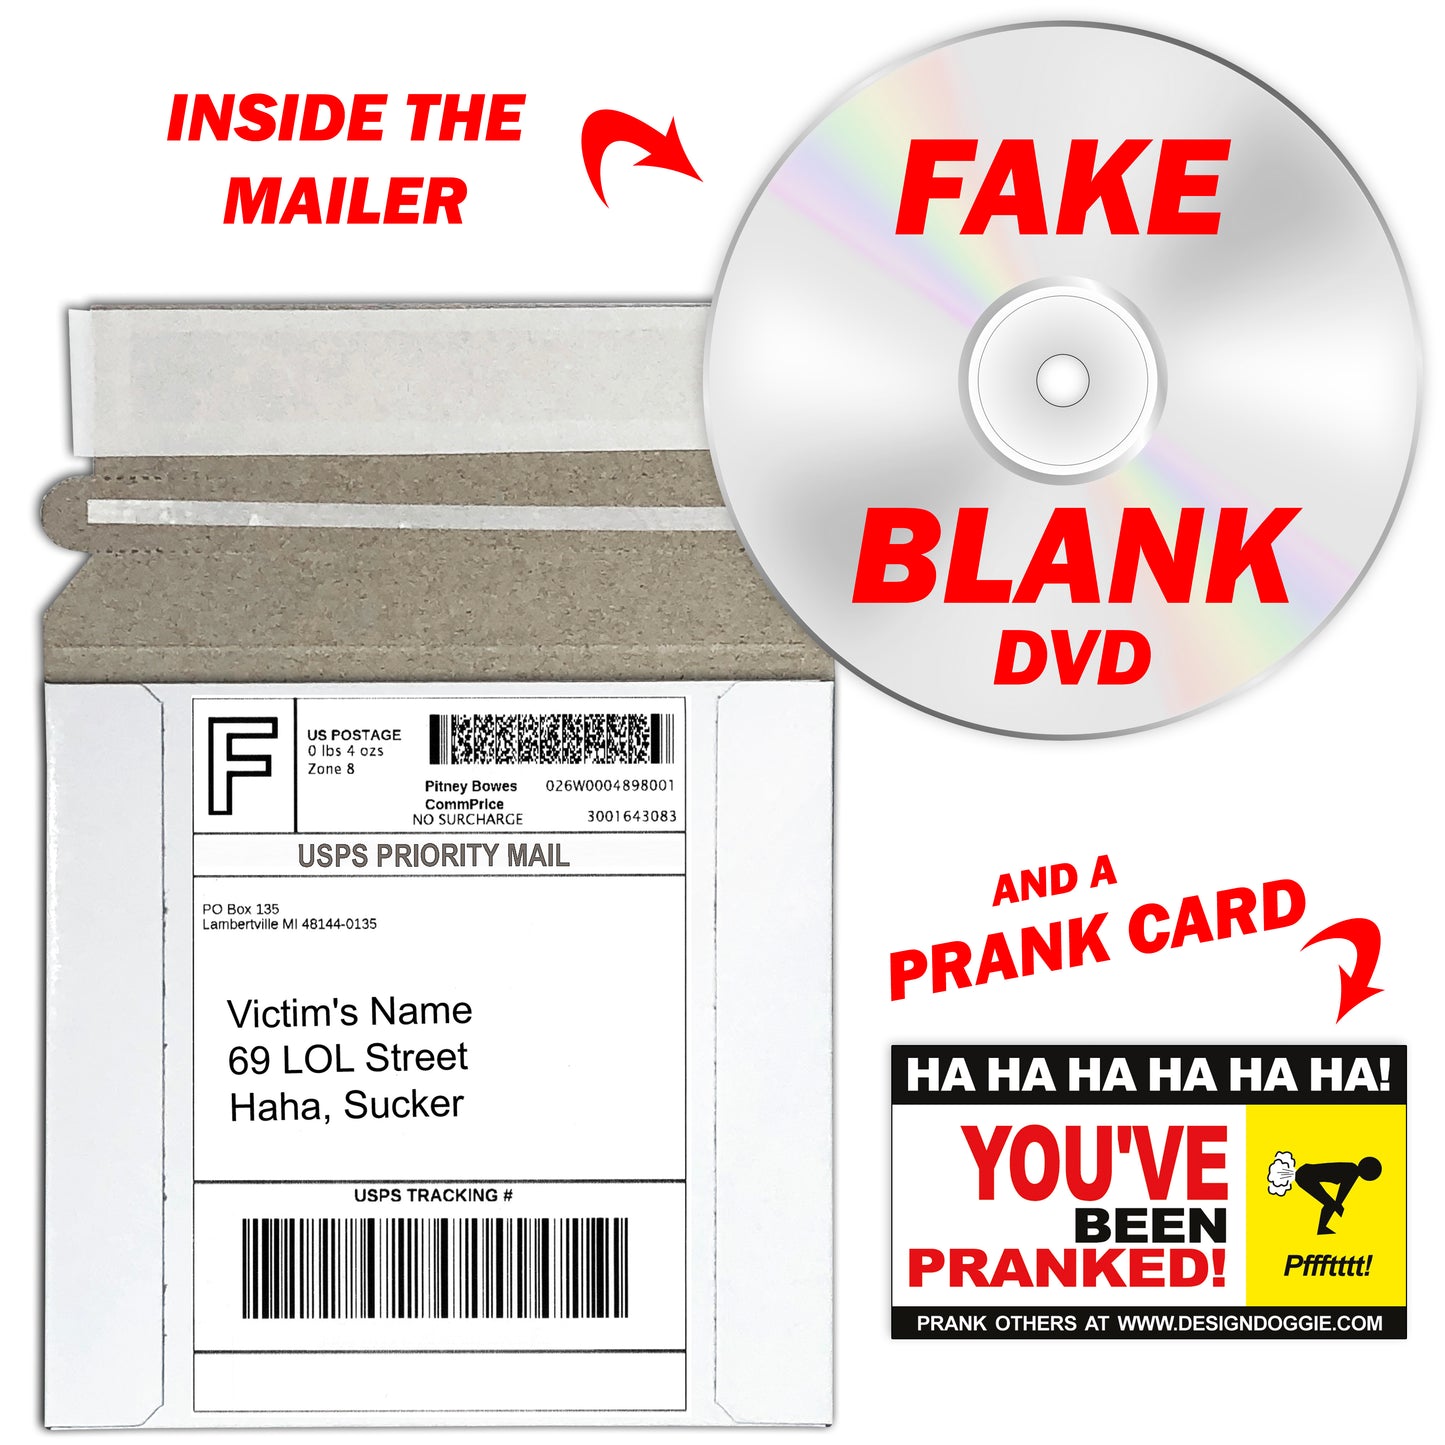 Clogged Toilets Fake DVD mail prank gets sent directly to your victims 100% anonymously!